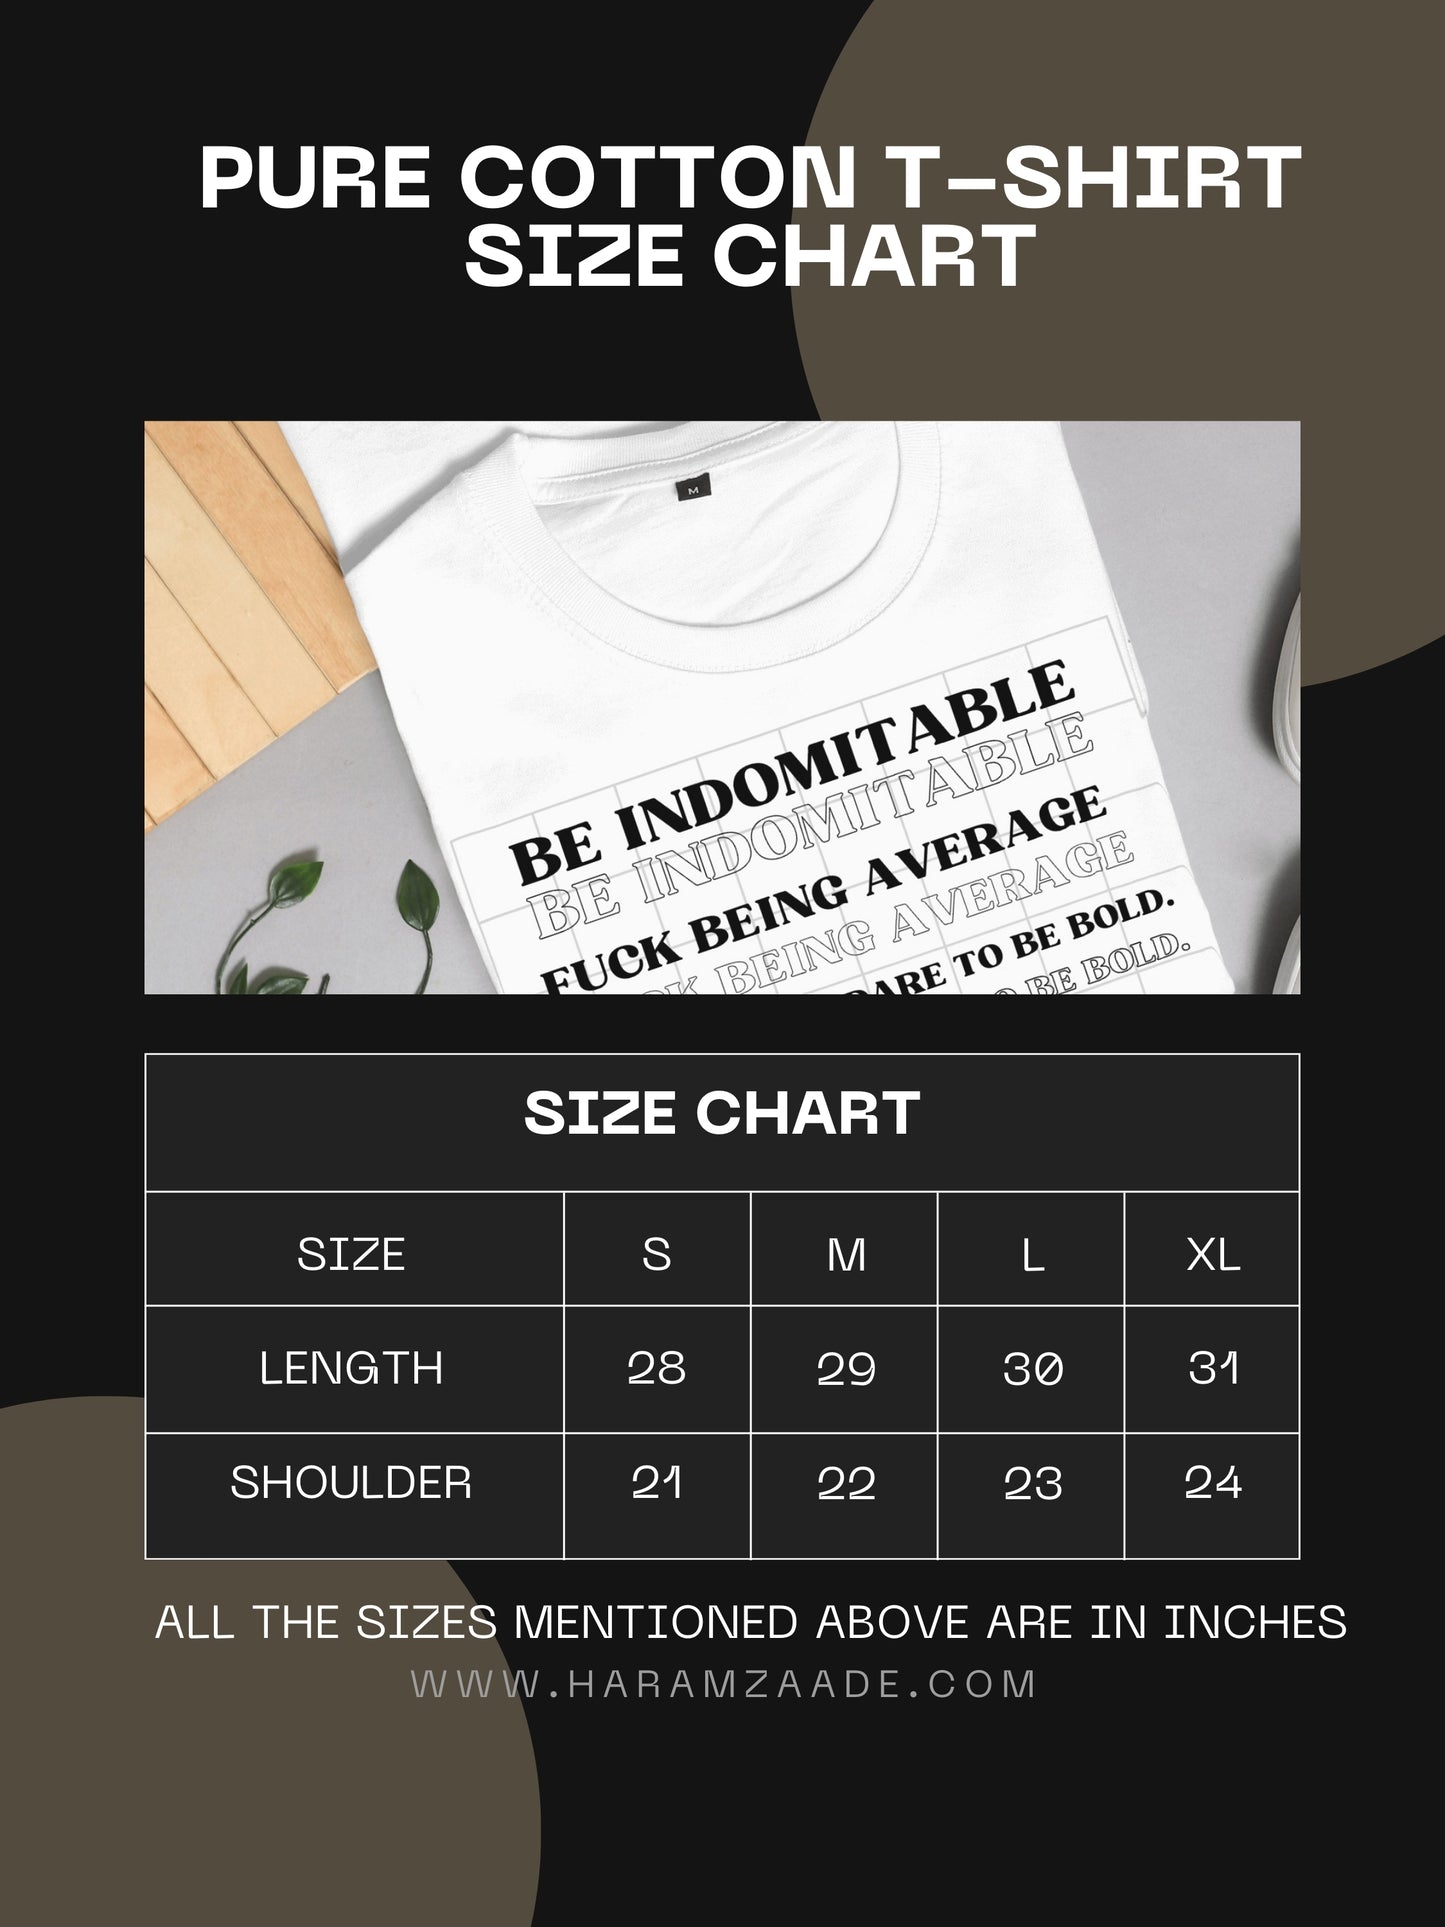 BE INDOMITABLE | F*CK BEING AVERAGE | DARE TO BE BOLD. - PURE COTTON T-SHIRT